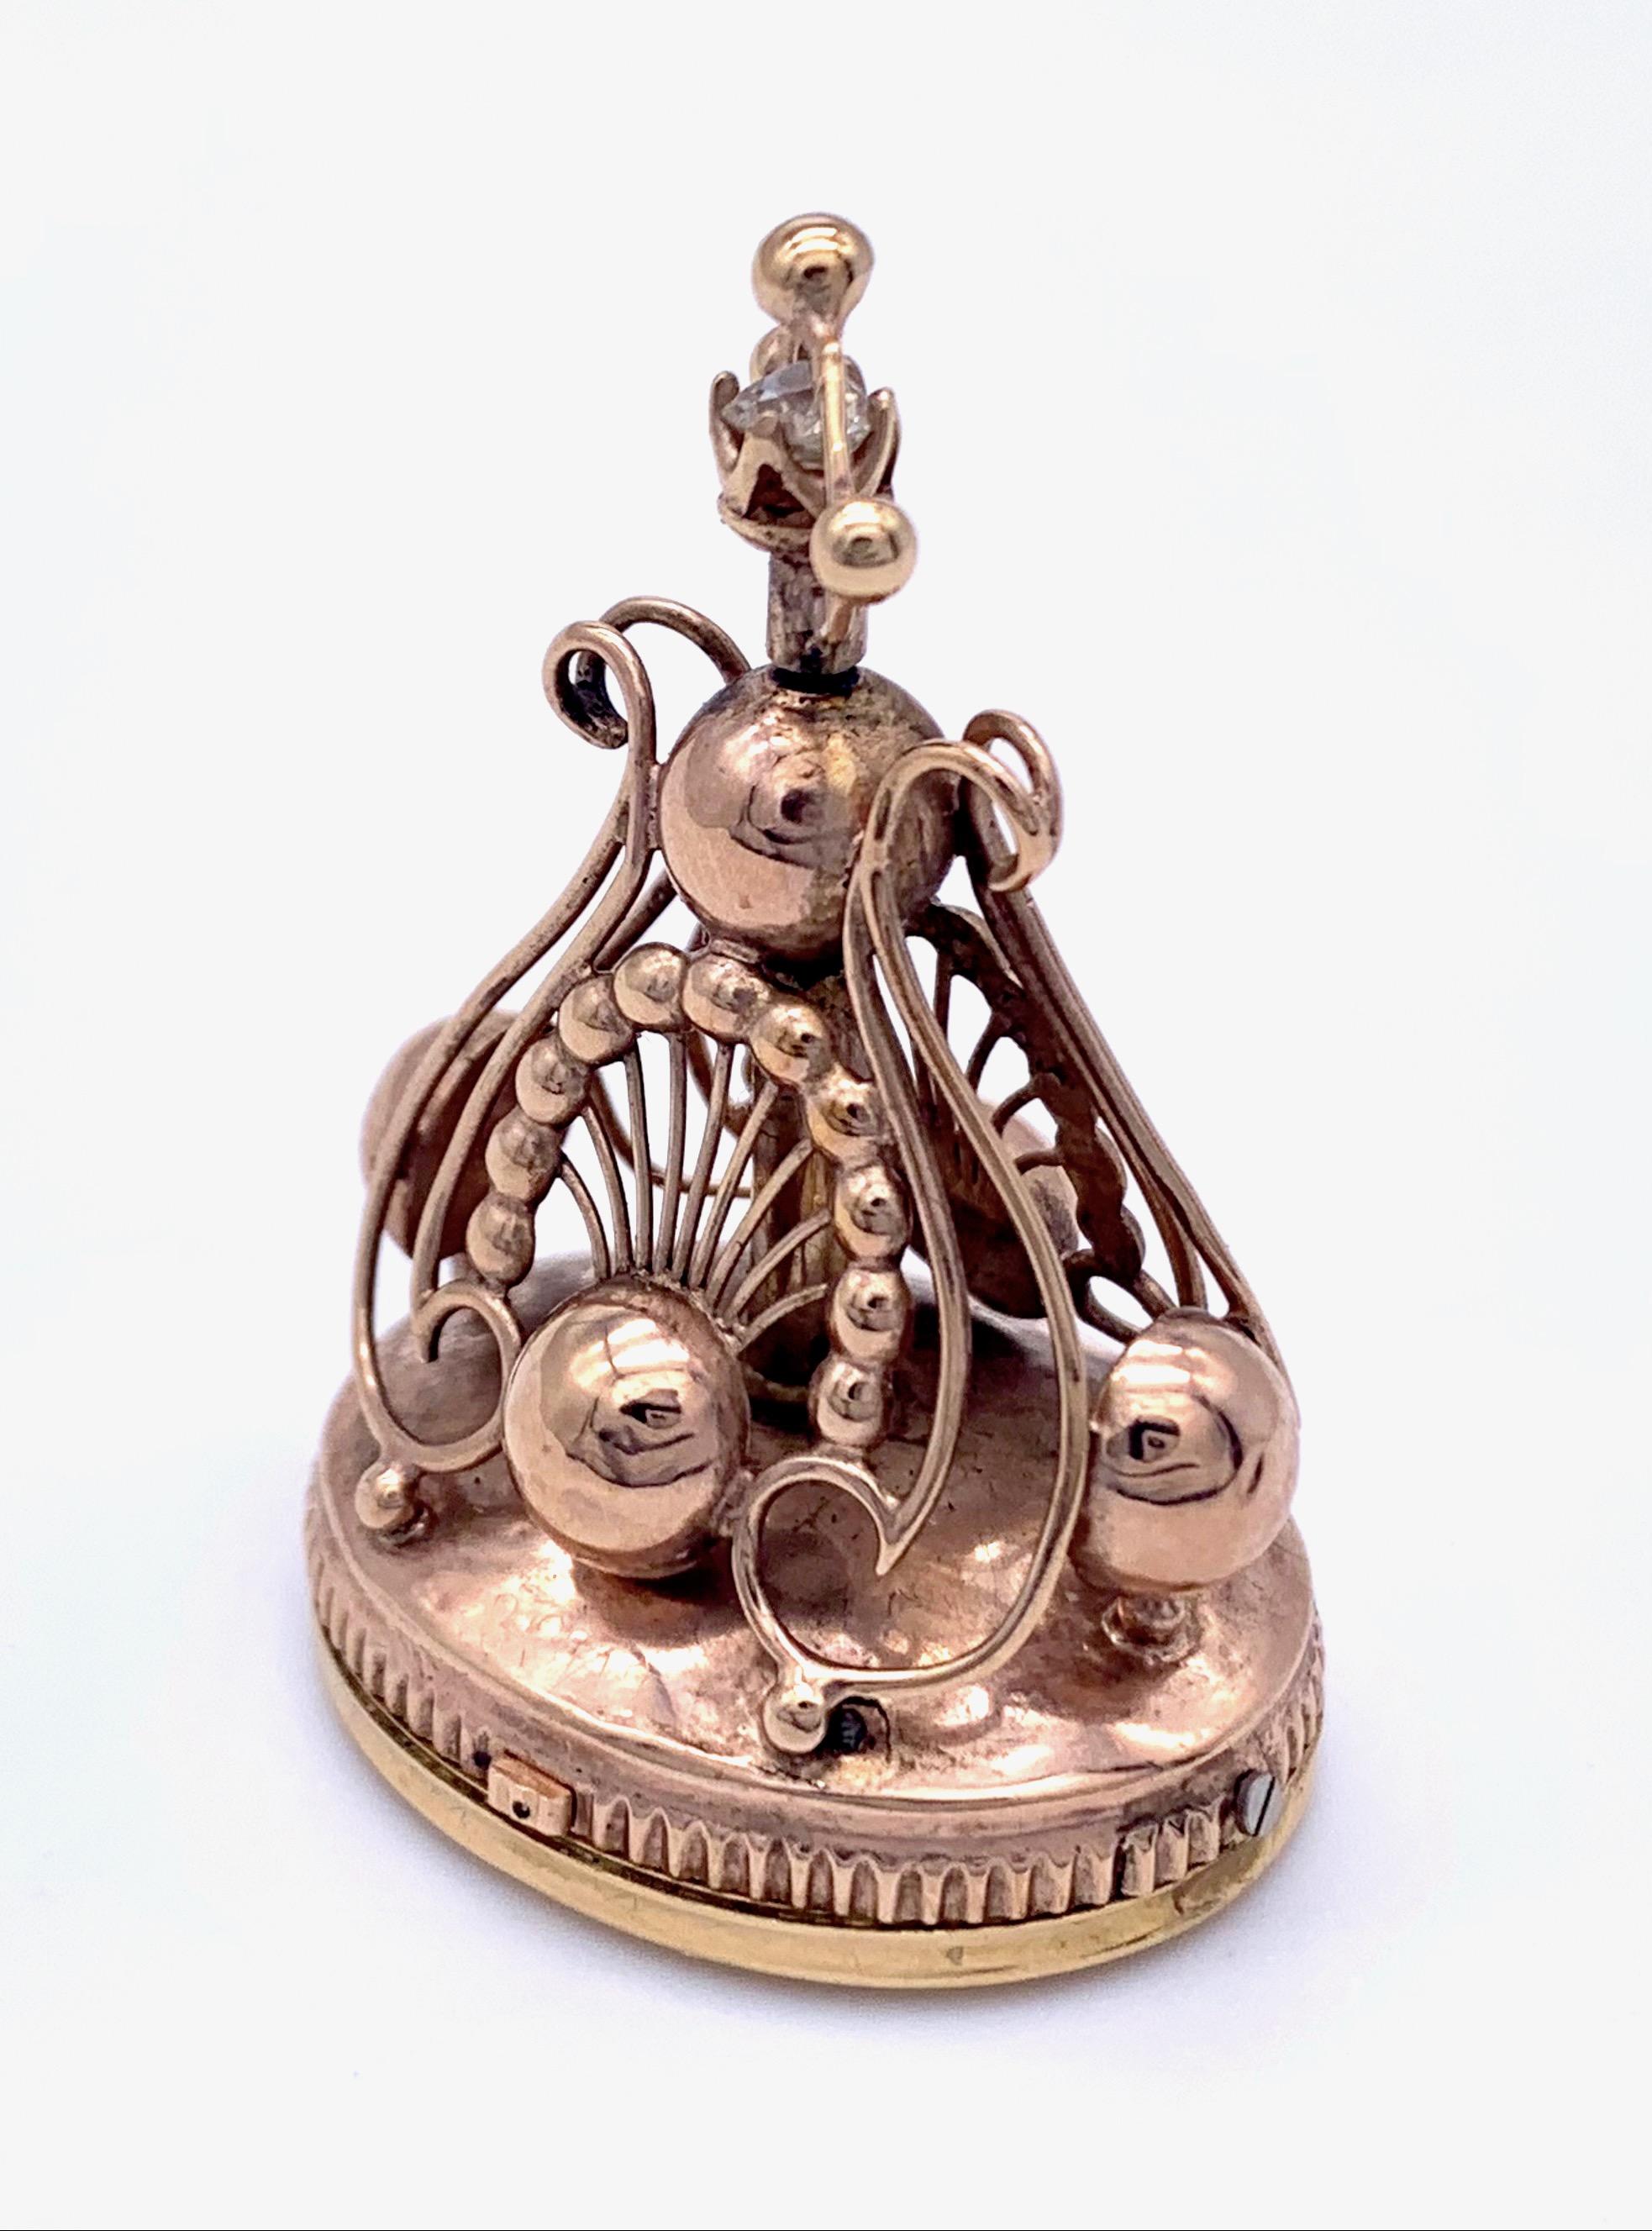 This highly unusual musical pendant was originally worn on a gentlemen's watchchain as an extraordinary curiosity. It is in full working order and plays a little tune. The top of this rare jewel is embellished with a diamond.